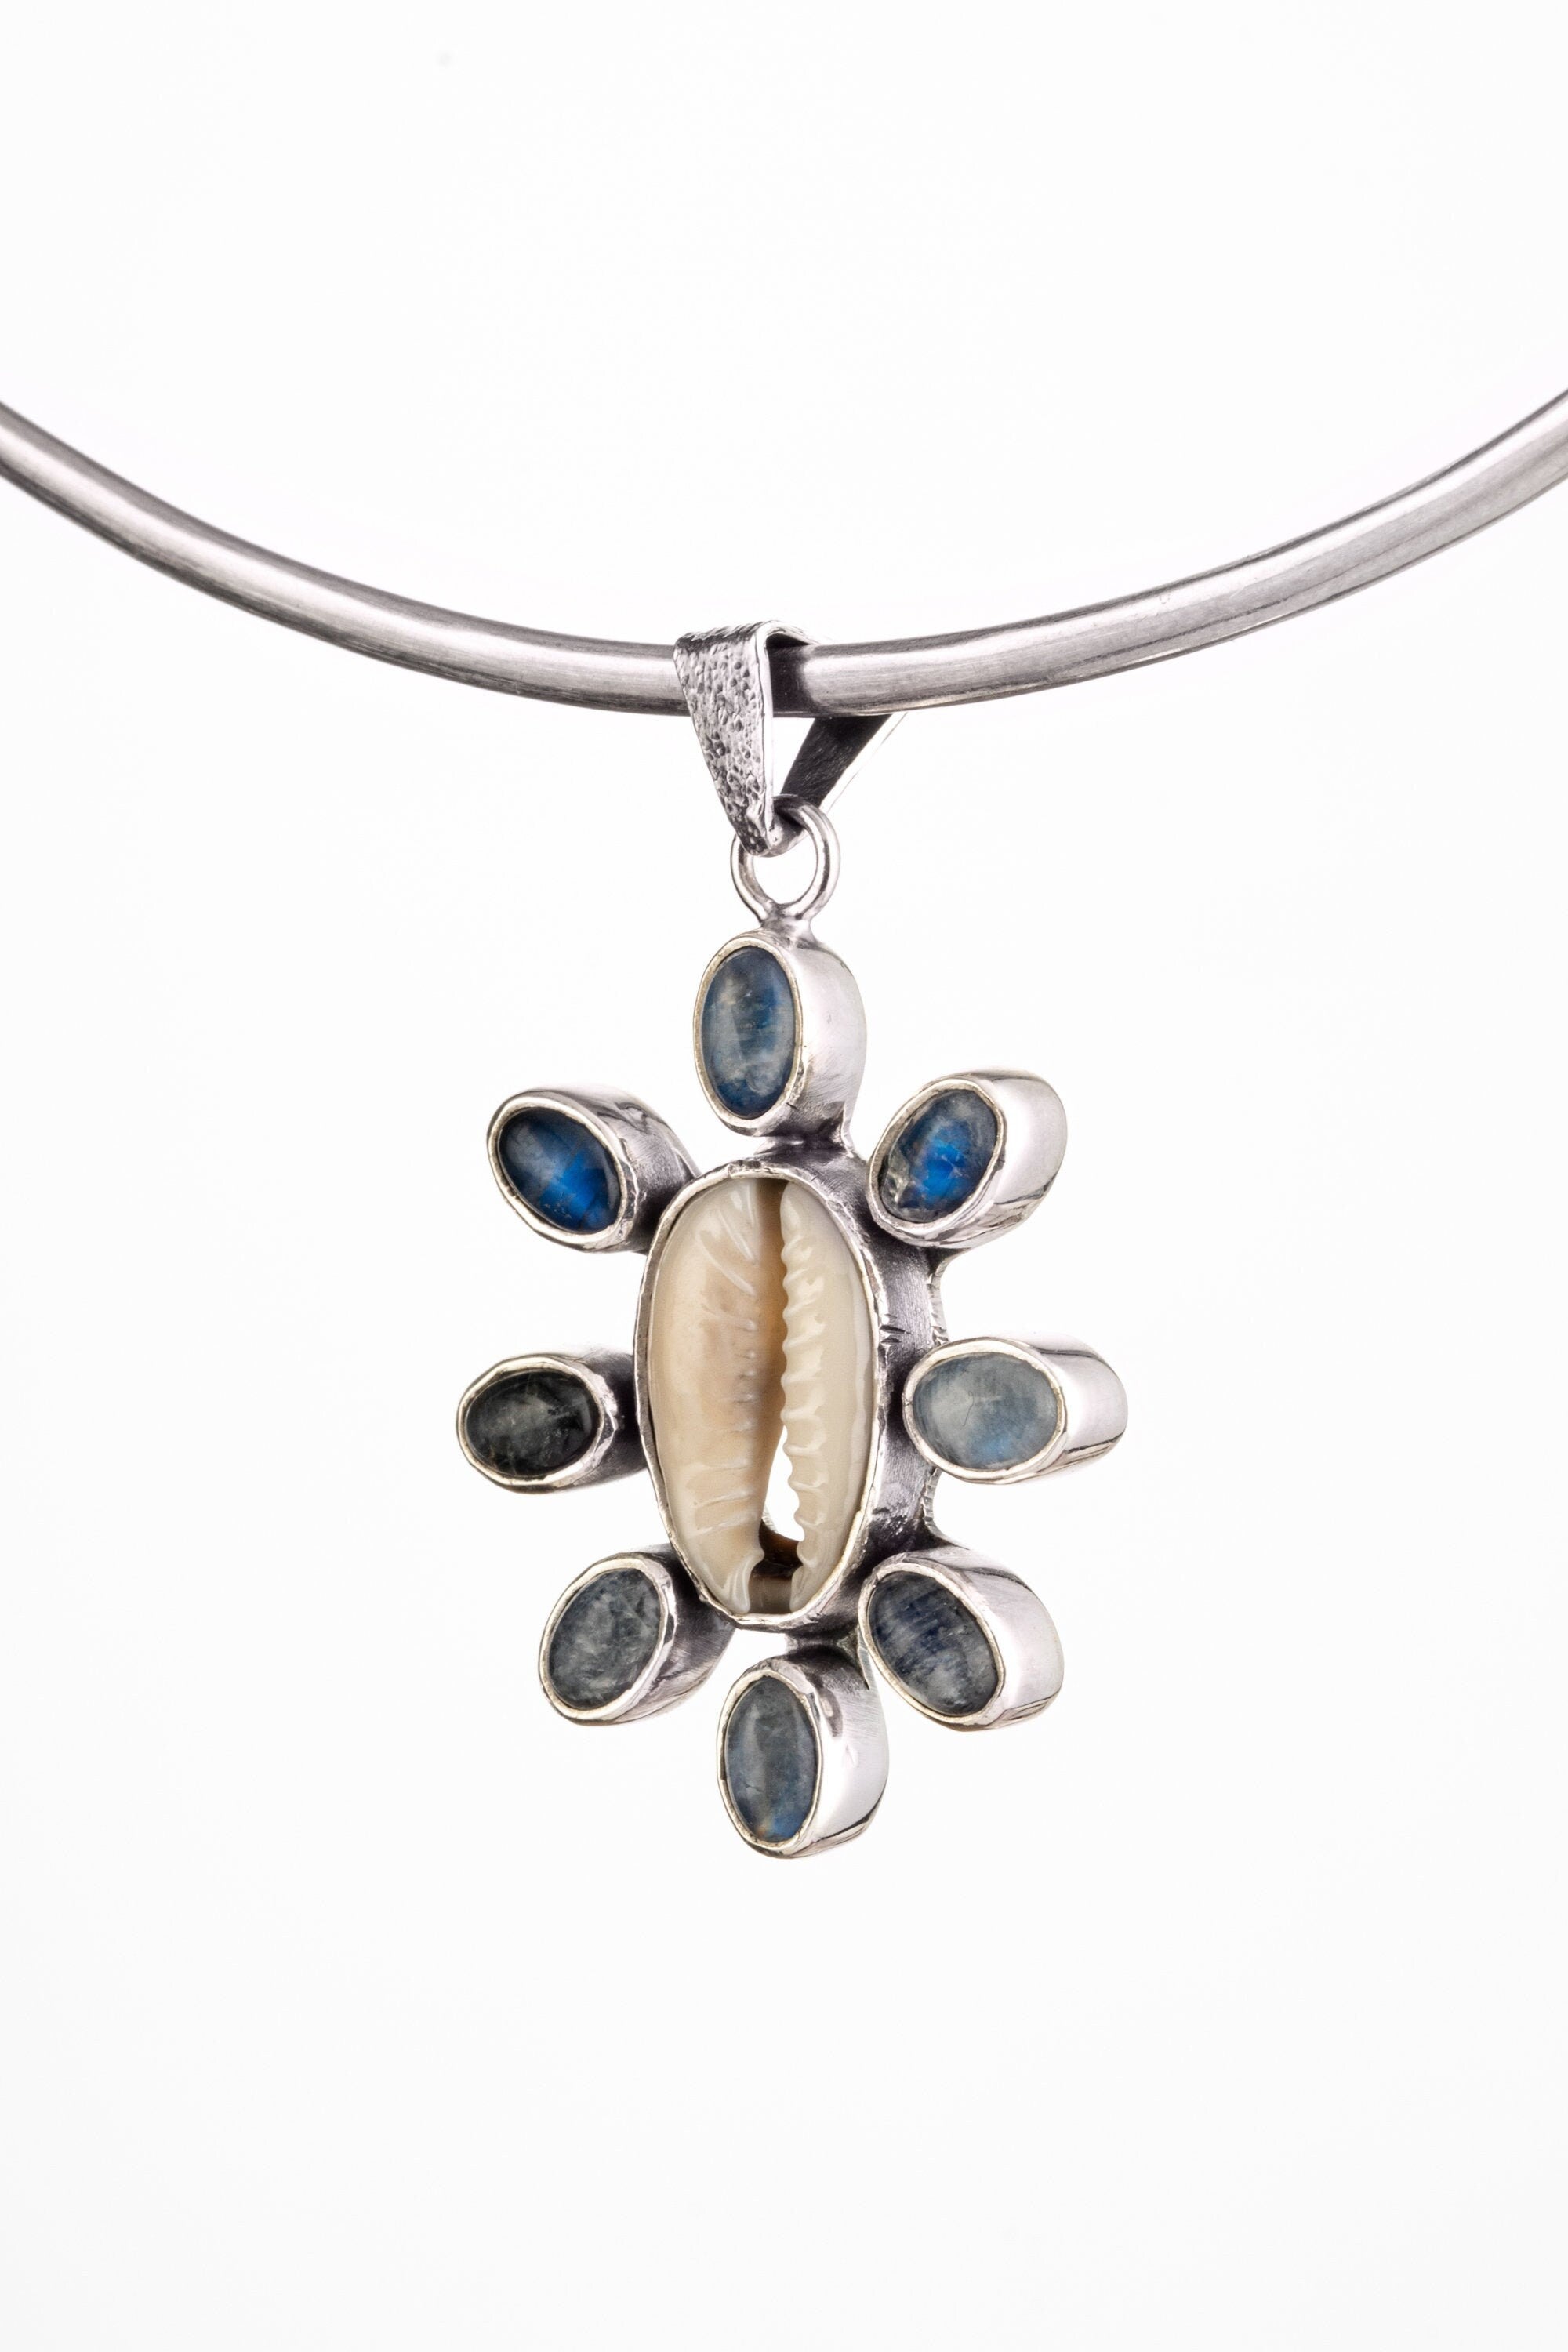 Cowrie Shell & Moonstone - 925 Sterling Silver - Mandala Setting - Pendant Necklace No/9